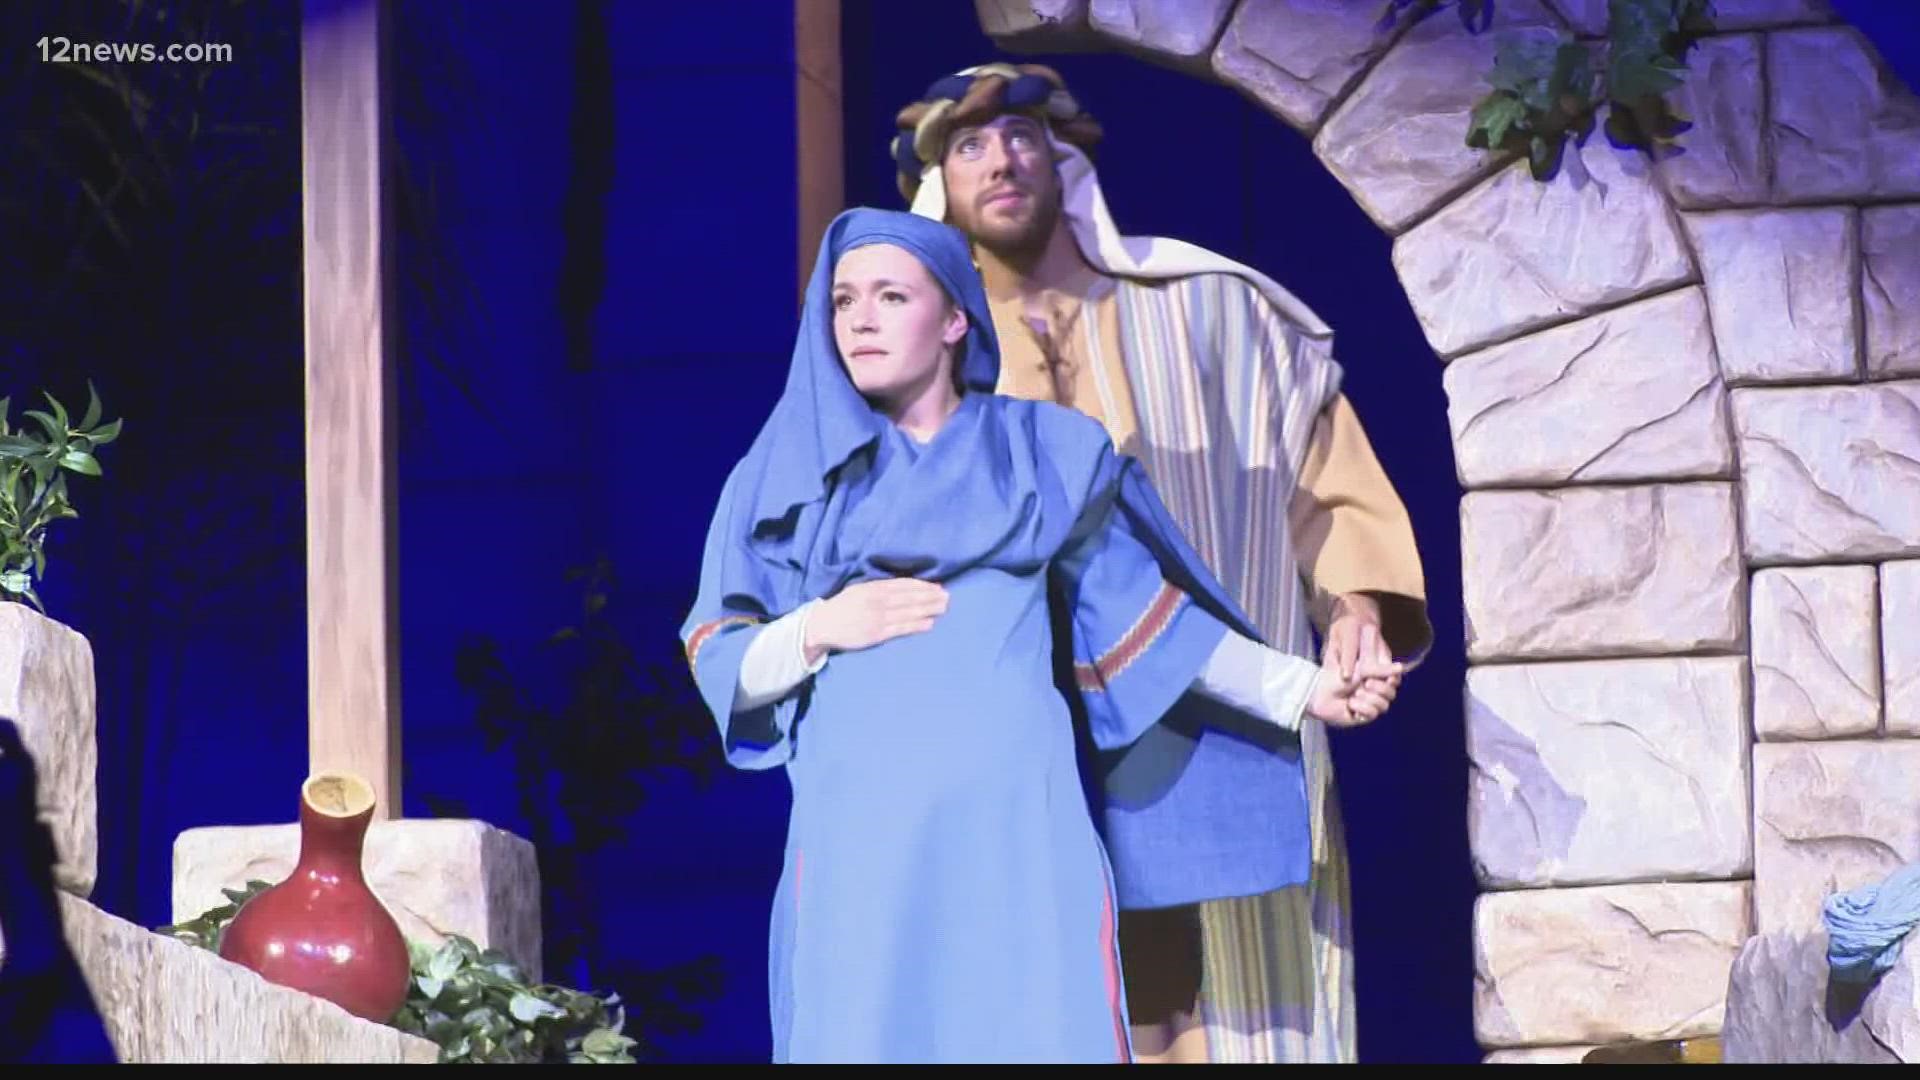 After more than three years of renovations, the Easter pageant at the LDS Temple in Mesa is returning. There will be new sets and a new script. The event is free.